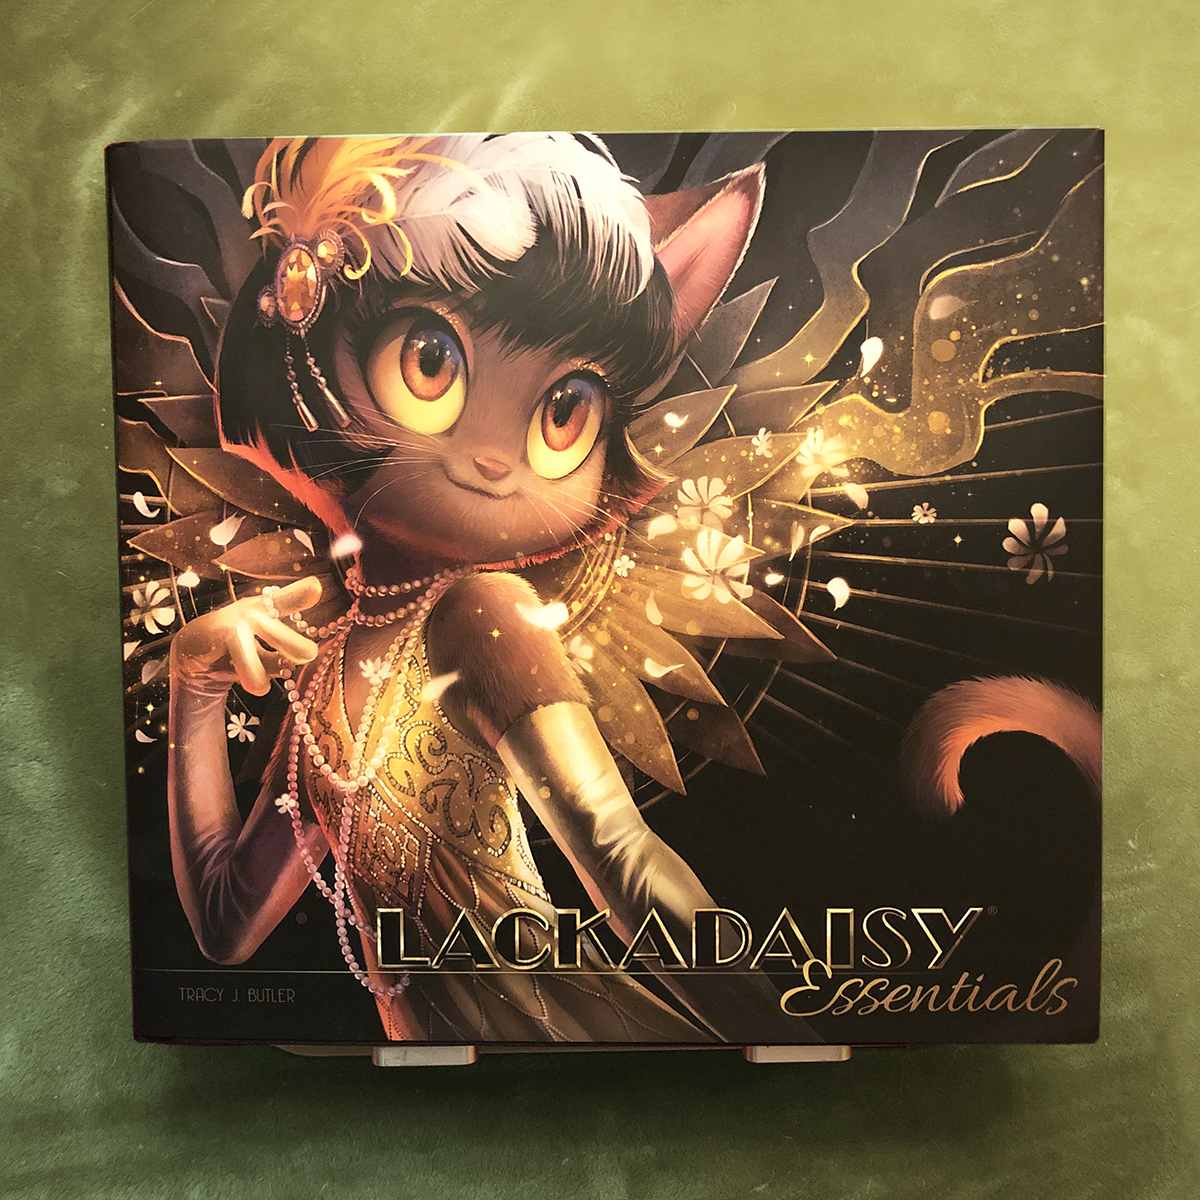 Lackadaisy Tracy on X: The Lackadaisy Essentials book is here! We'll be  fulfilling Kickstarter backers books this month! Meanwhile, Iron Circus has  a limited 500 books up in the shop! These come